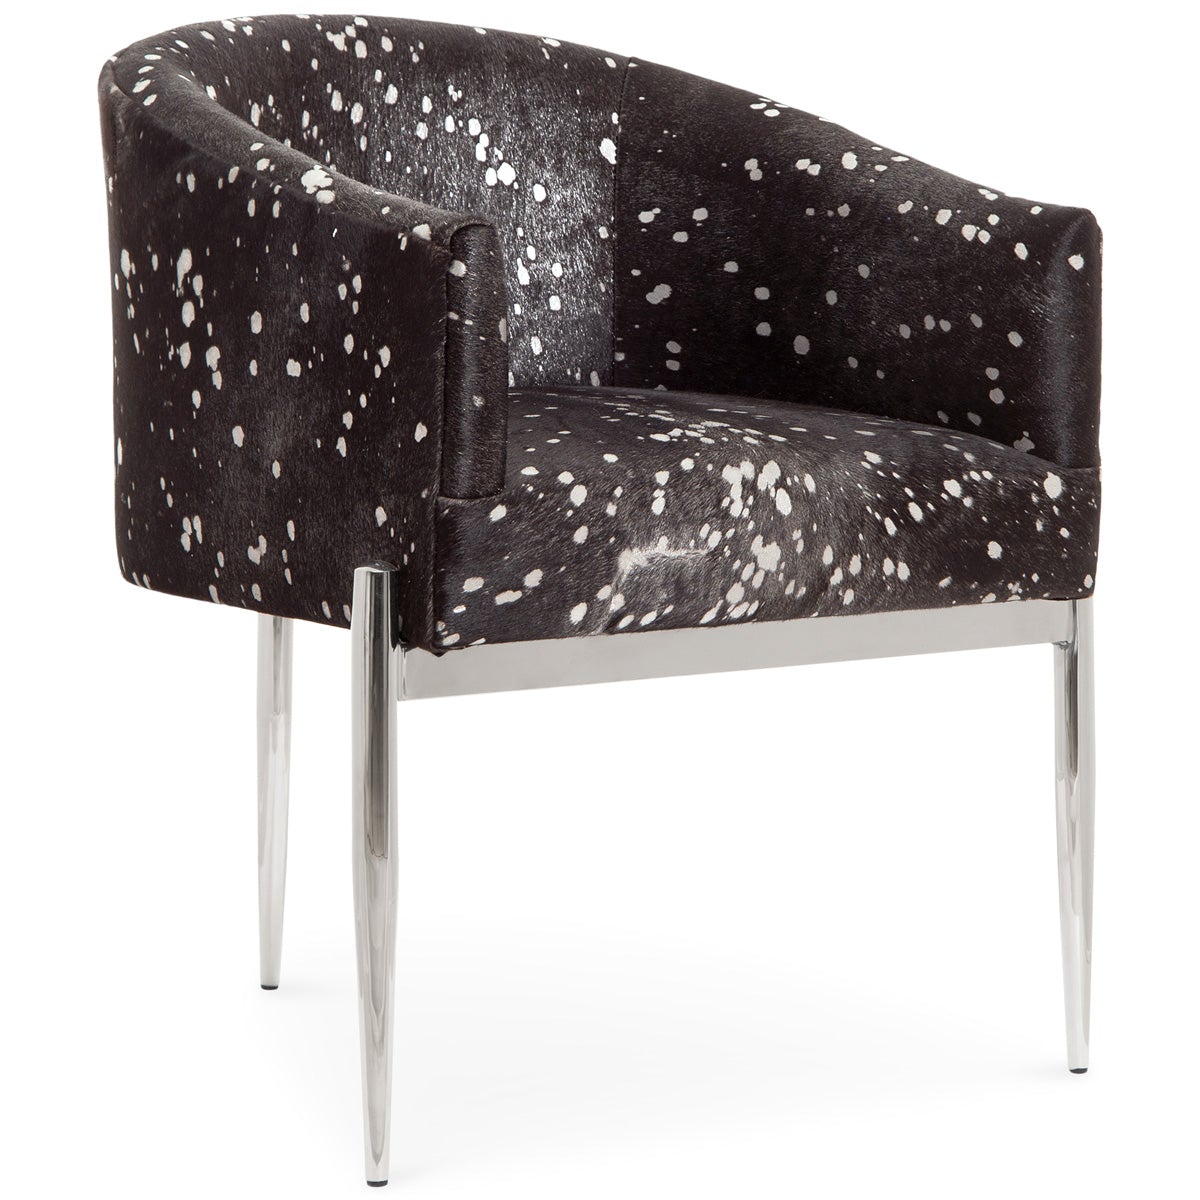 Art Deco Dining Chair in Black Silver Speckled Cowhide - ModShop1.com